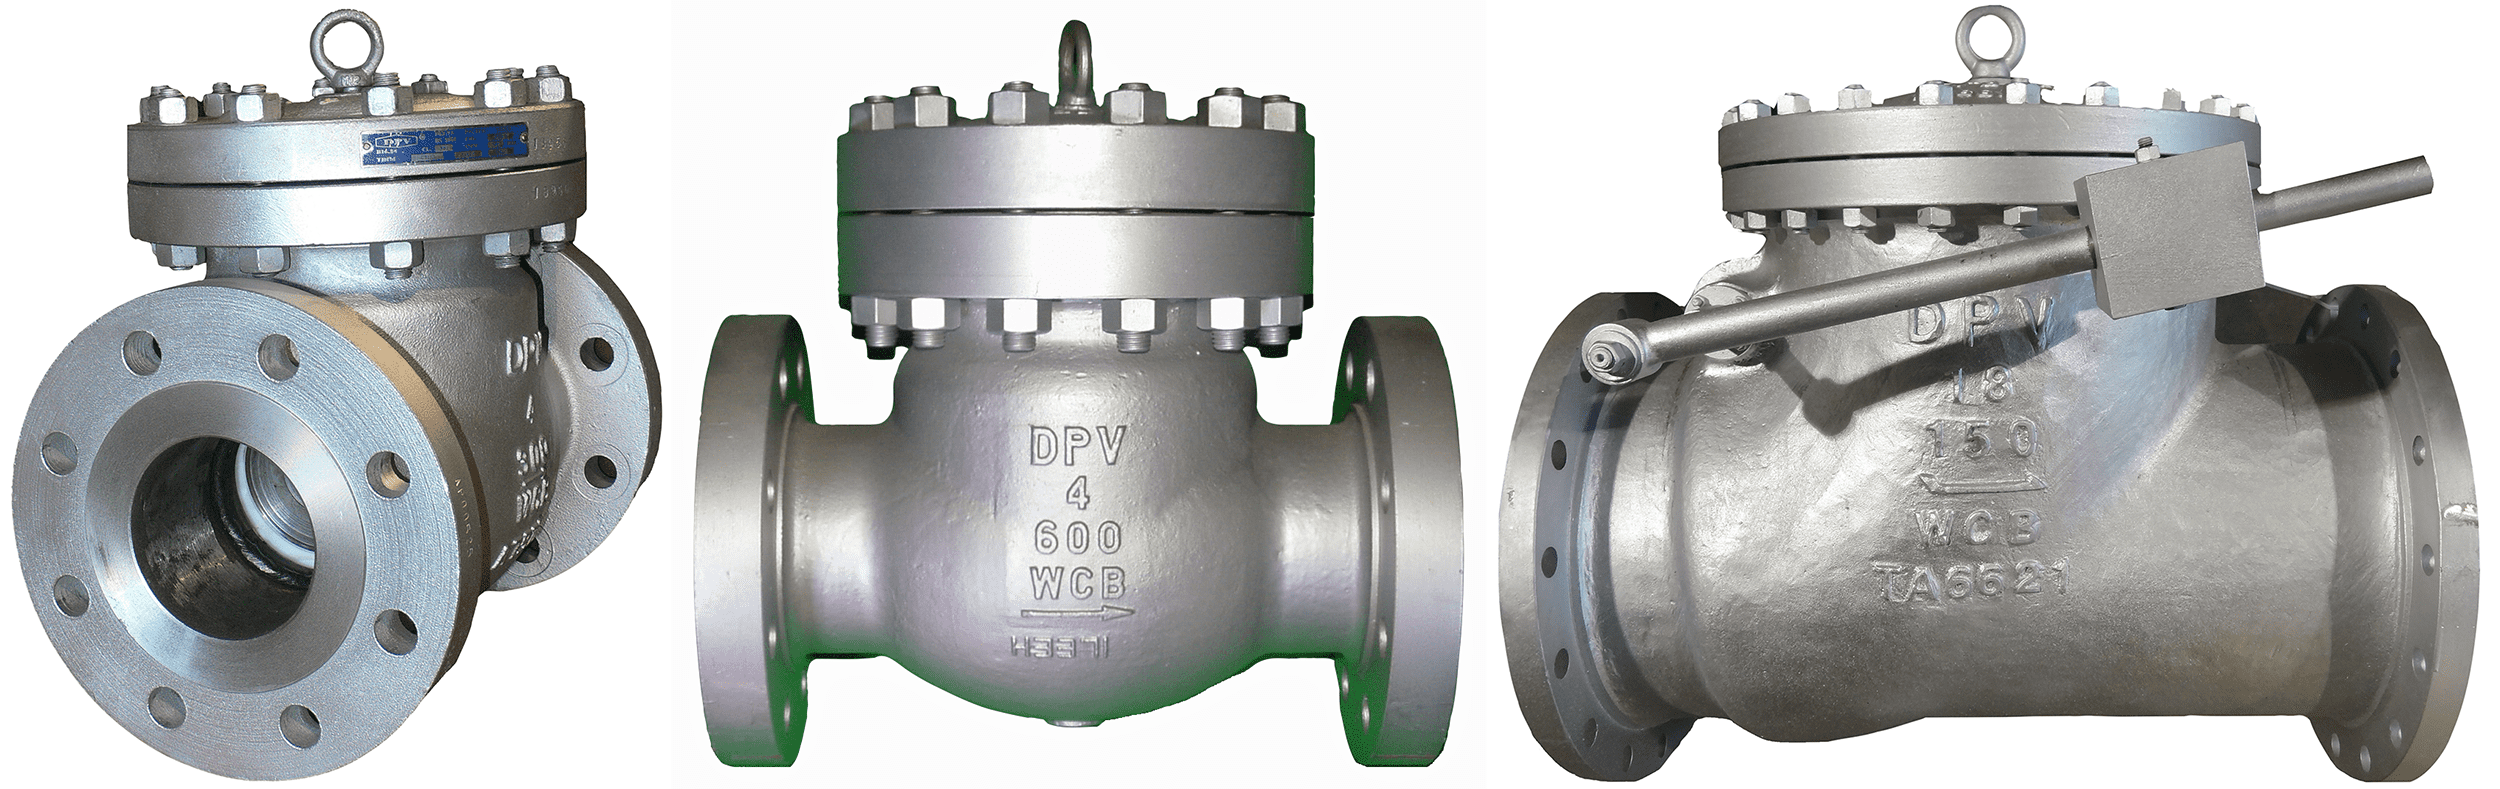 DPV® API 6D Swing Check Valves, Bolted Cover, Regular and Full-opening Types